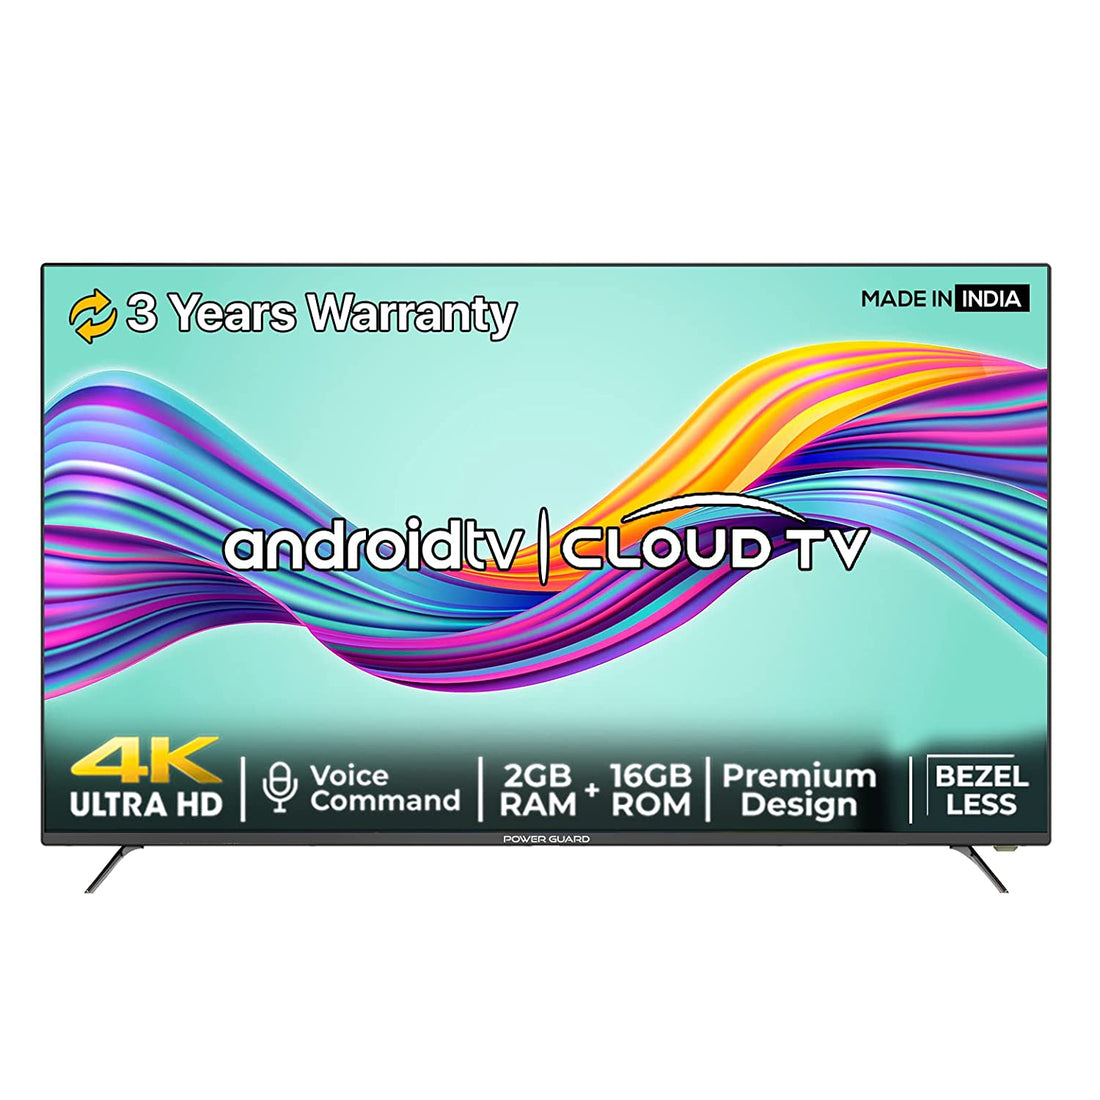 Amazon 65 Inch Smart TV - Find Your Perfect TV Today!